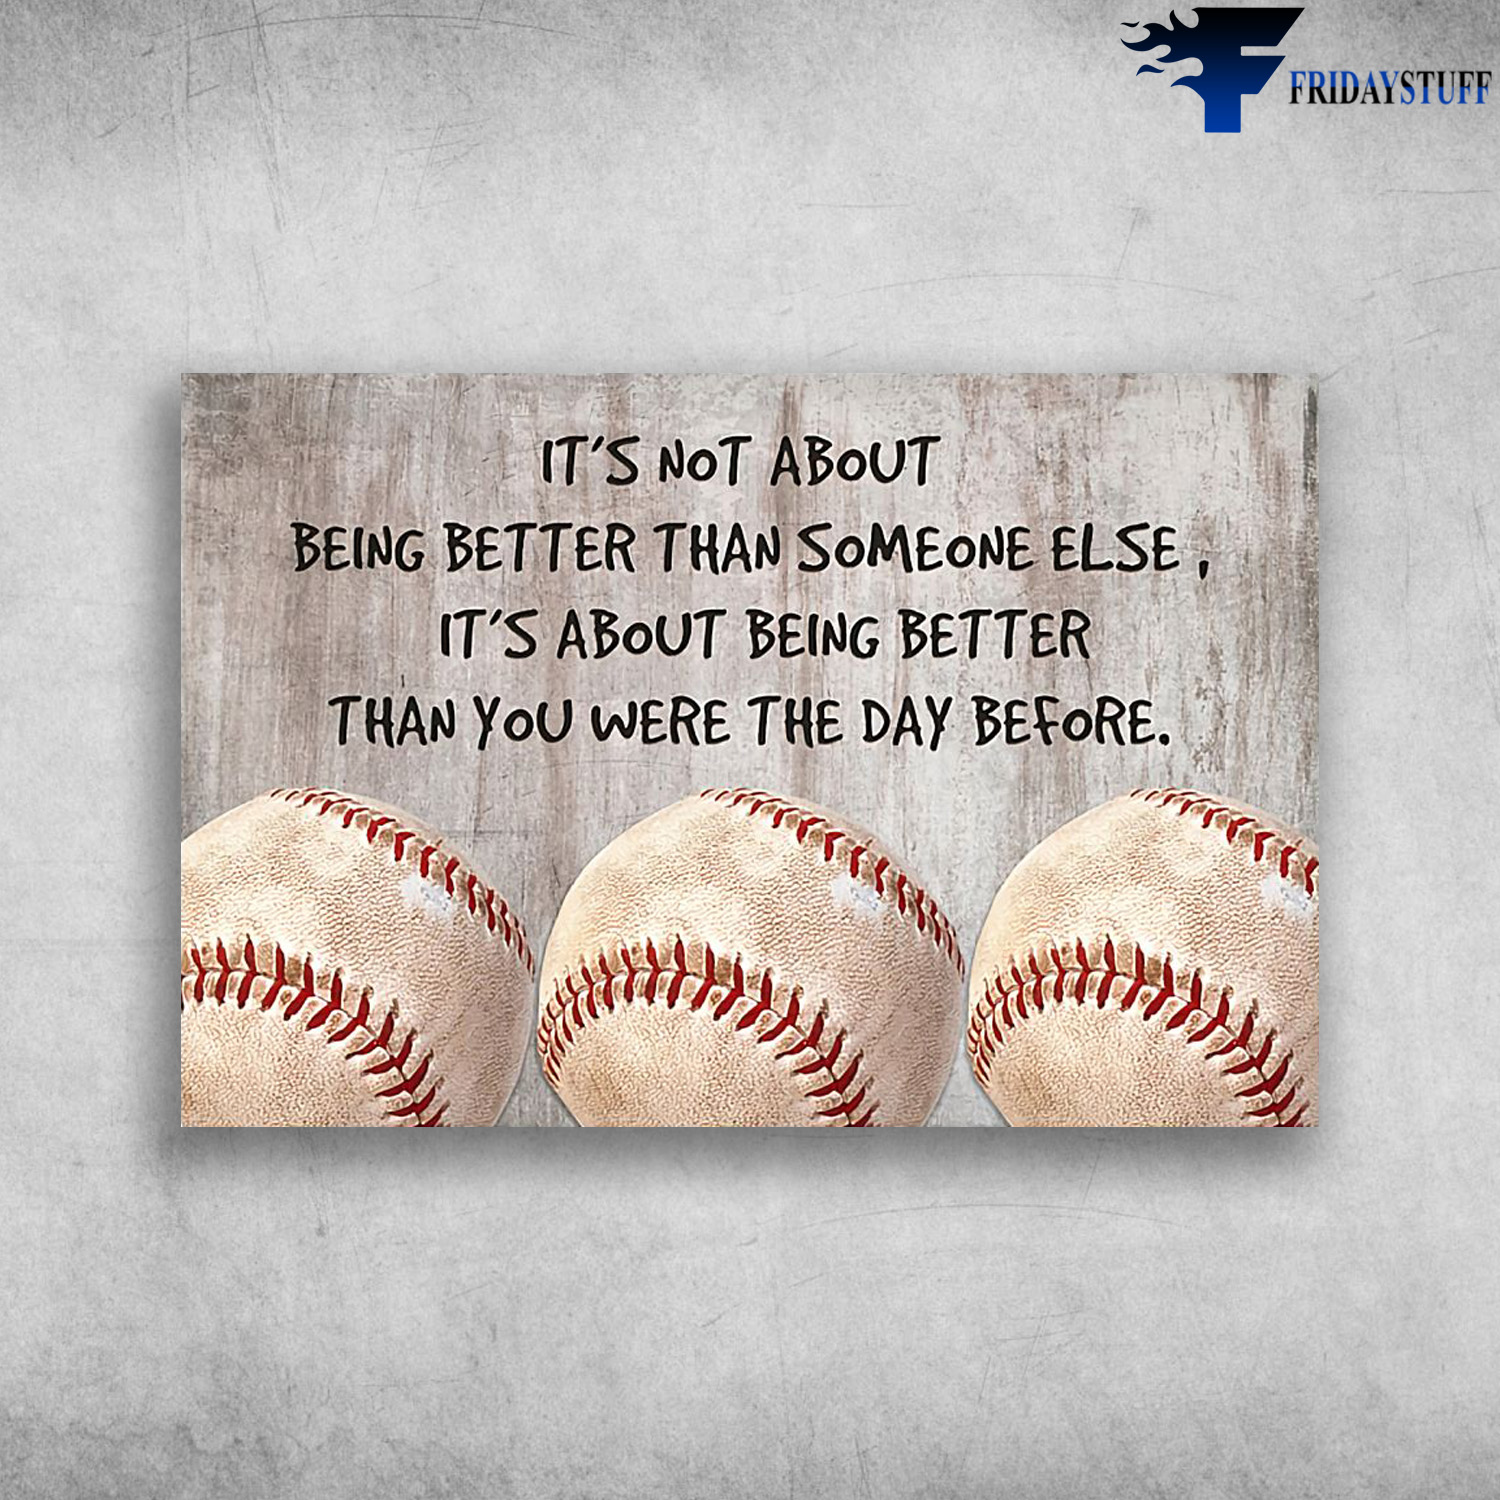 Baseball Ball – It’s Not About Being Better Than Someone Else, It’s About Being Better Than You Were The Day Before